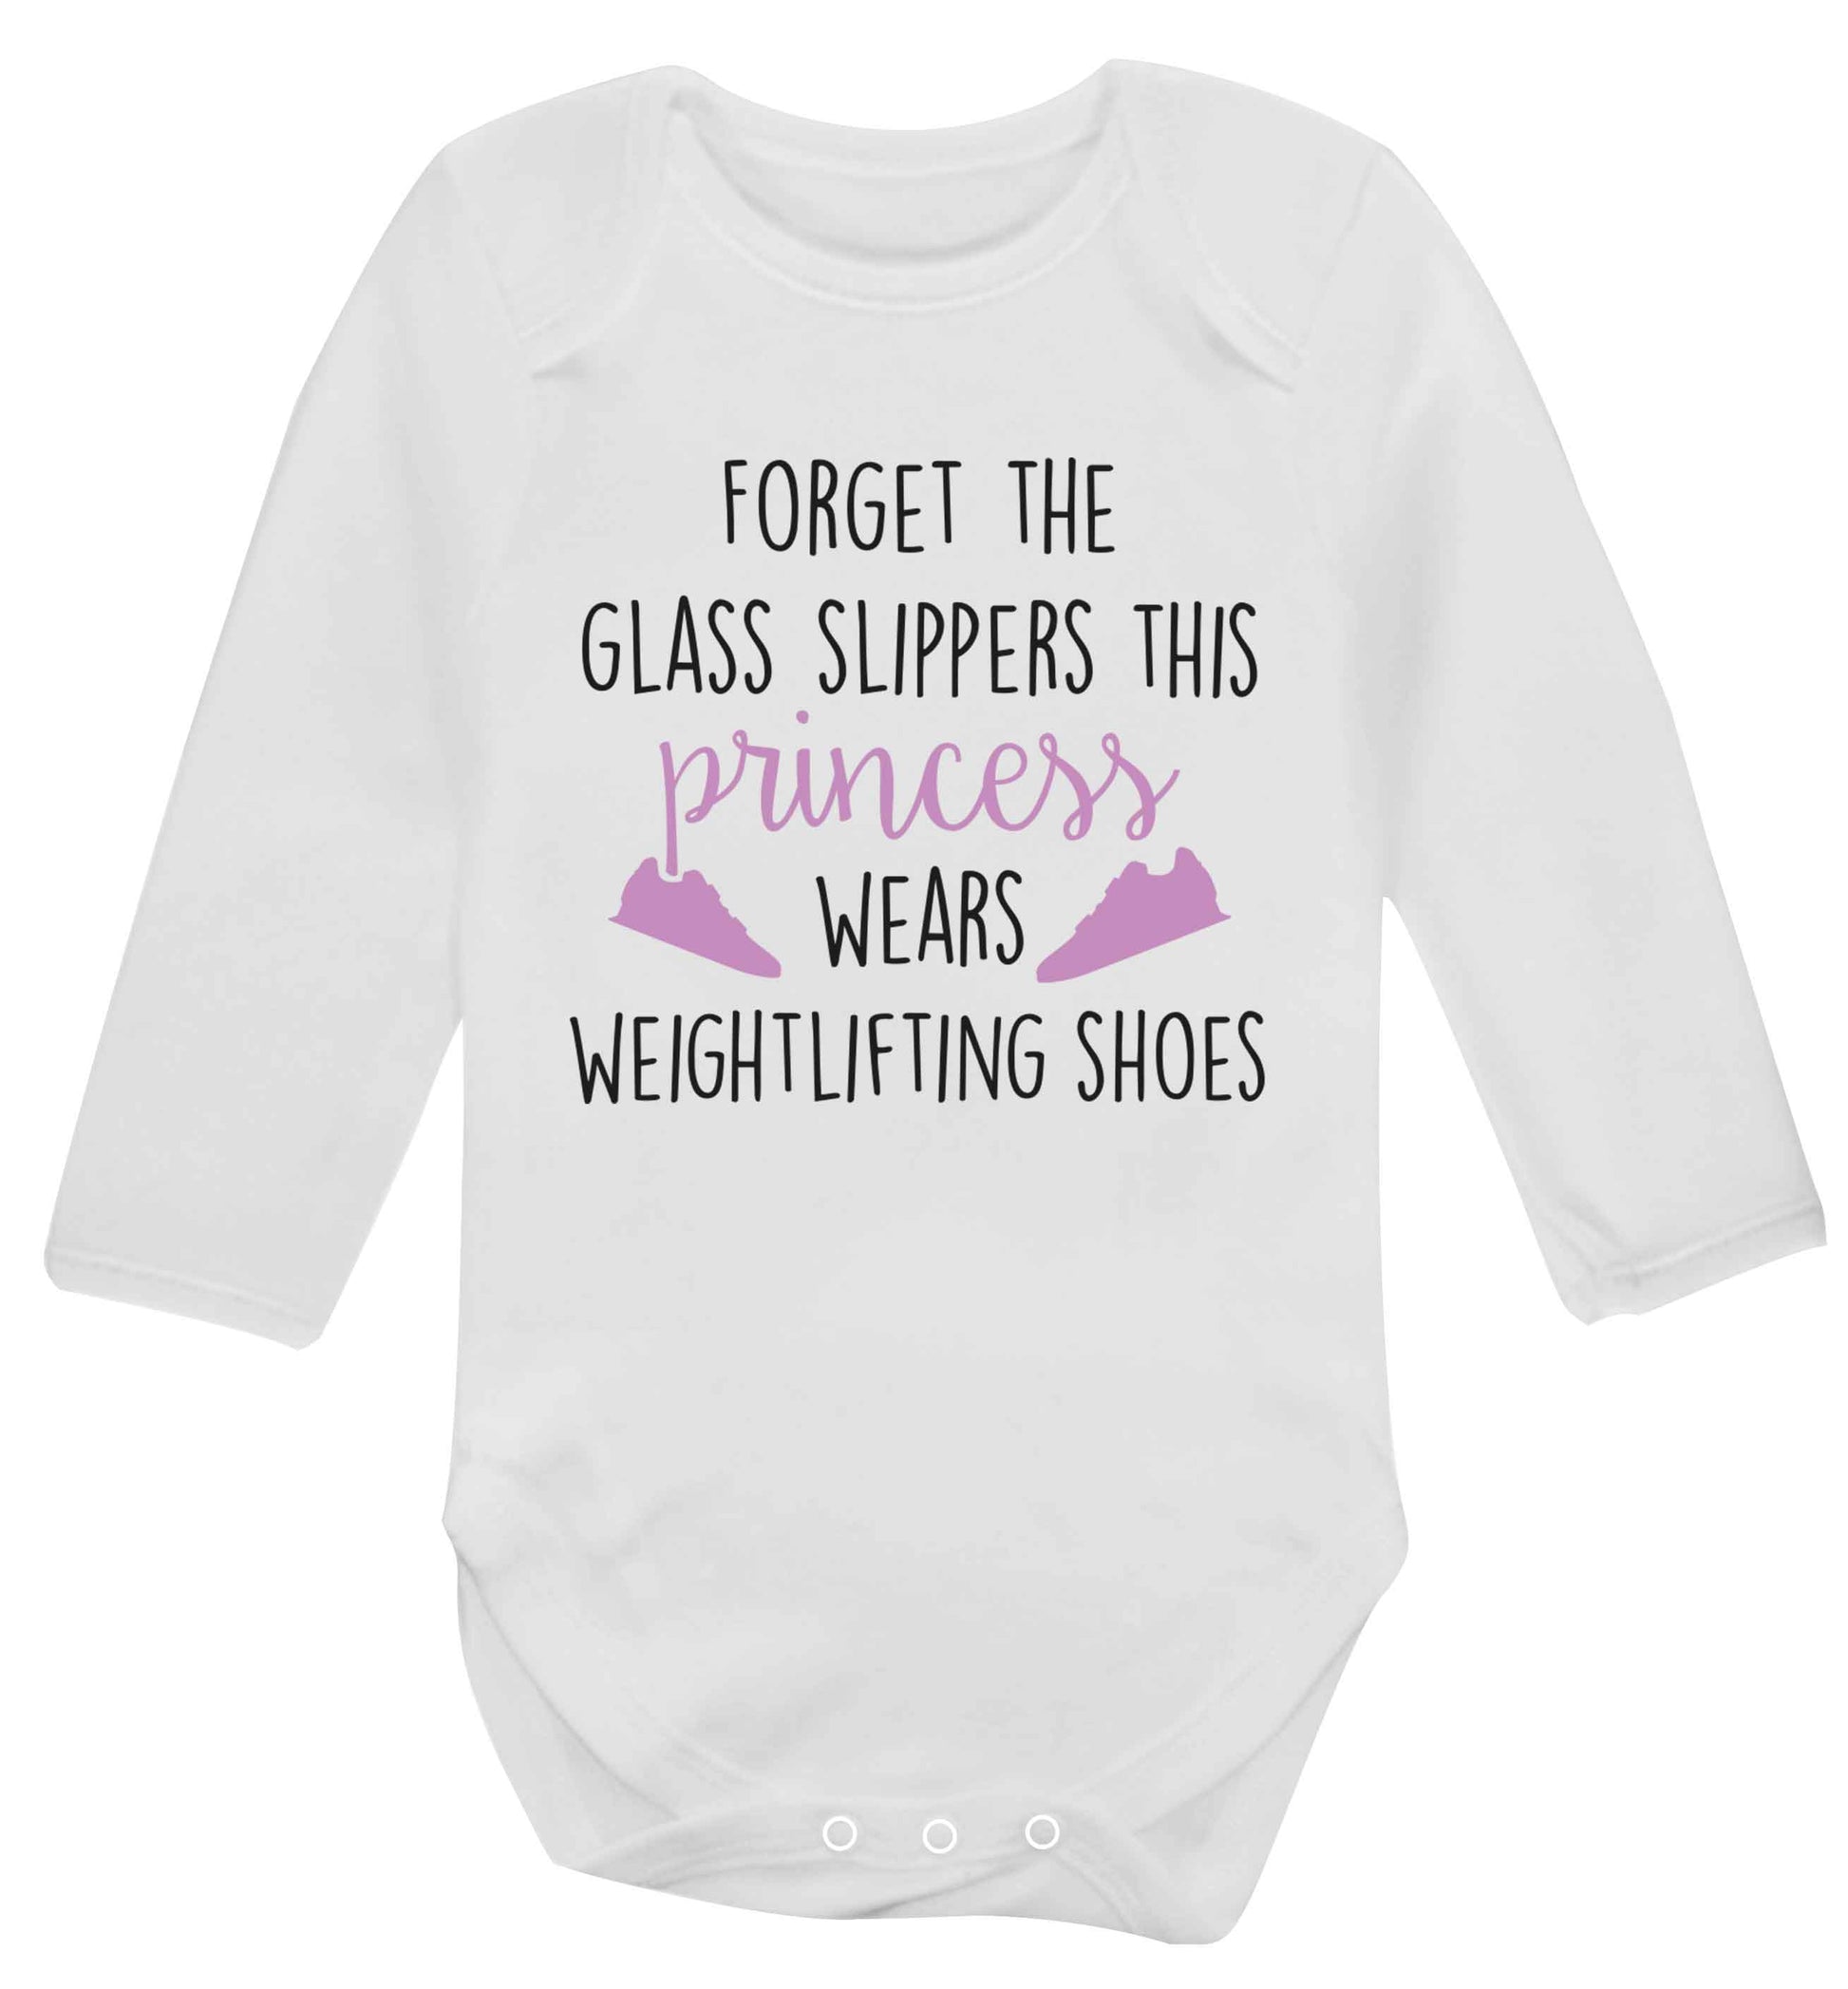 Forget the glass slippers this princess wears weightlifting shoes Baby Vest long sleeved white 6-12 months